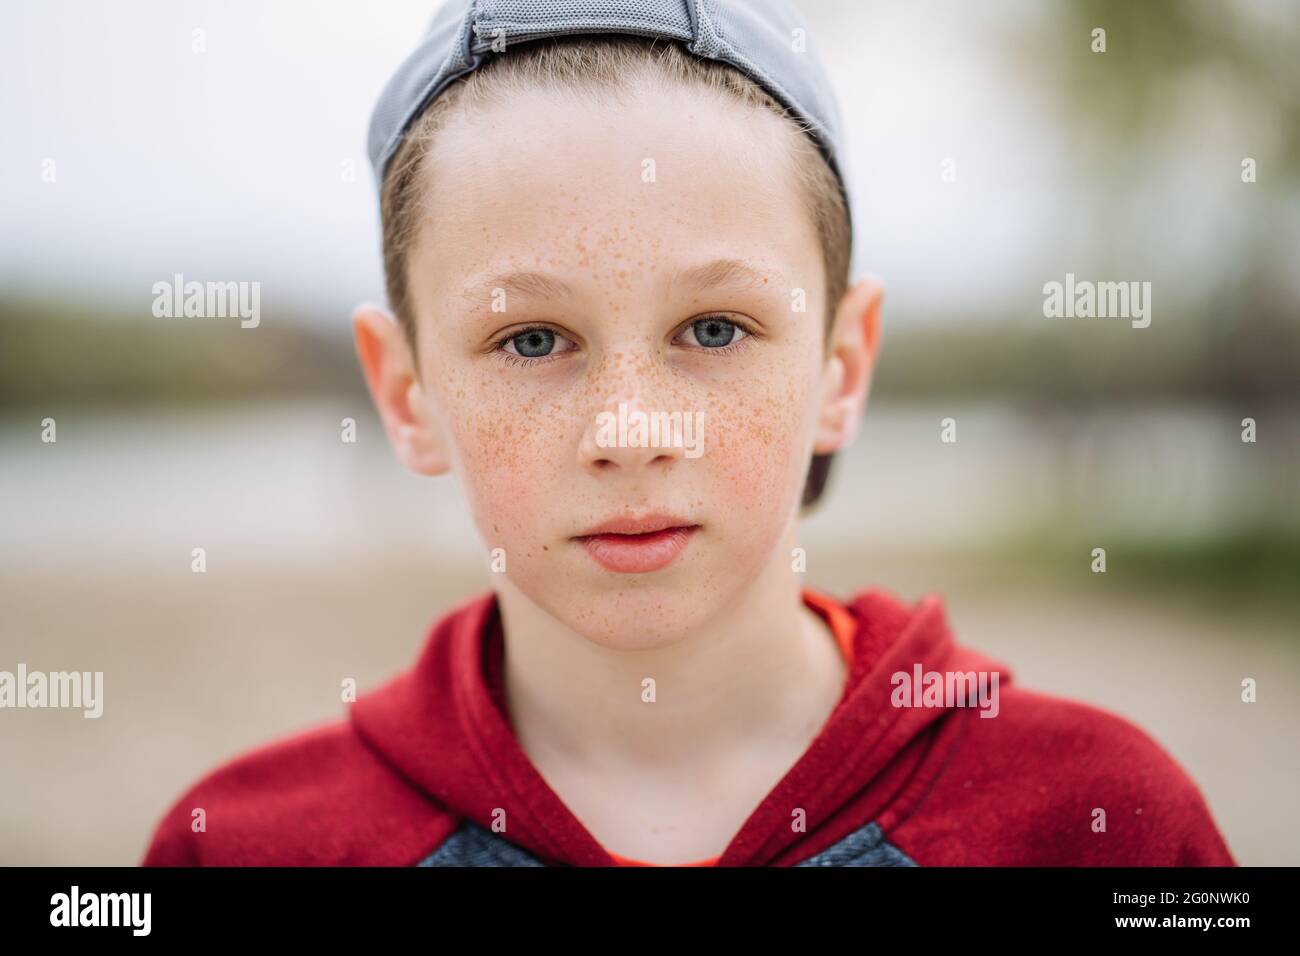 Close-up portrait of teenage serious boy with freckles on his face, shallow depth of field Stock Photo